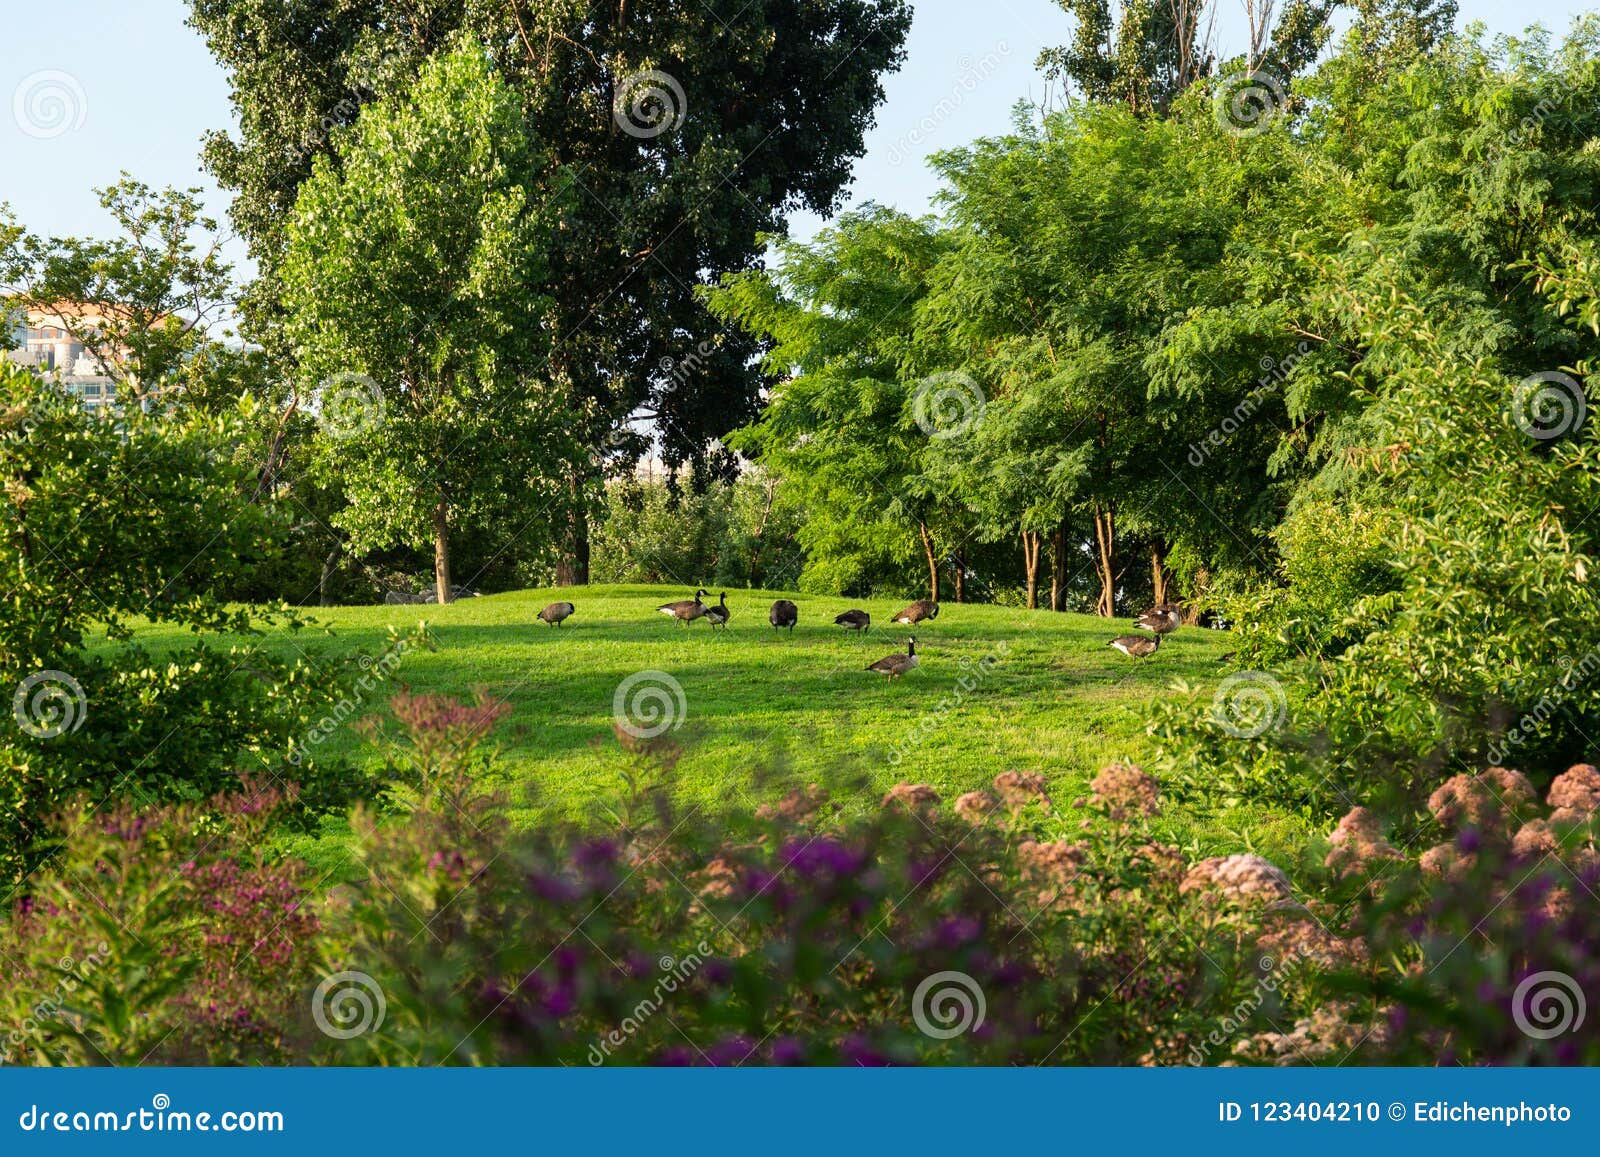 Plants and Animals in Park on Roosevelt Island New York City Stock Photo -  Image of bird, outdoor: 123404210